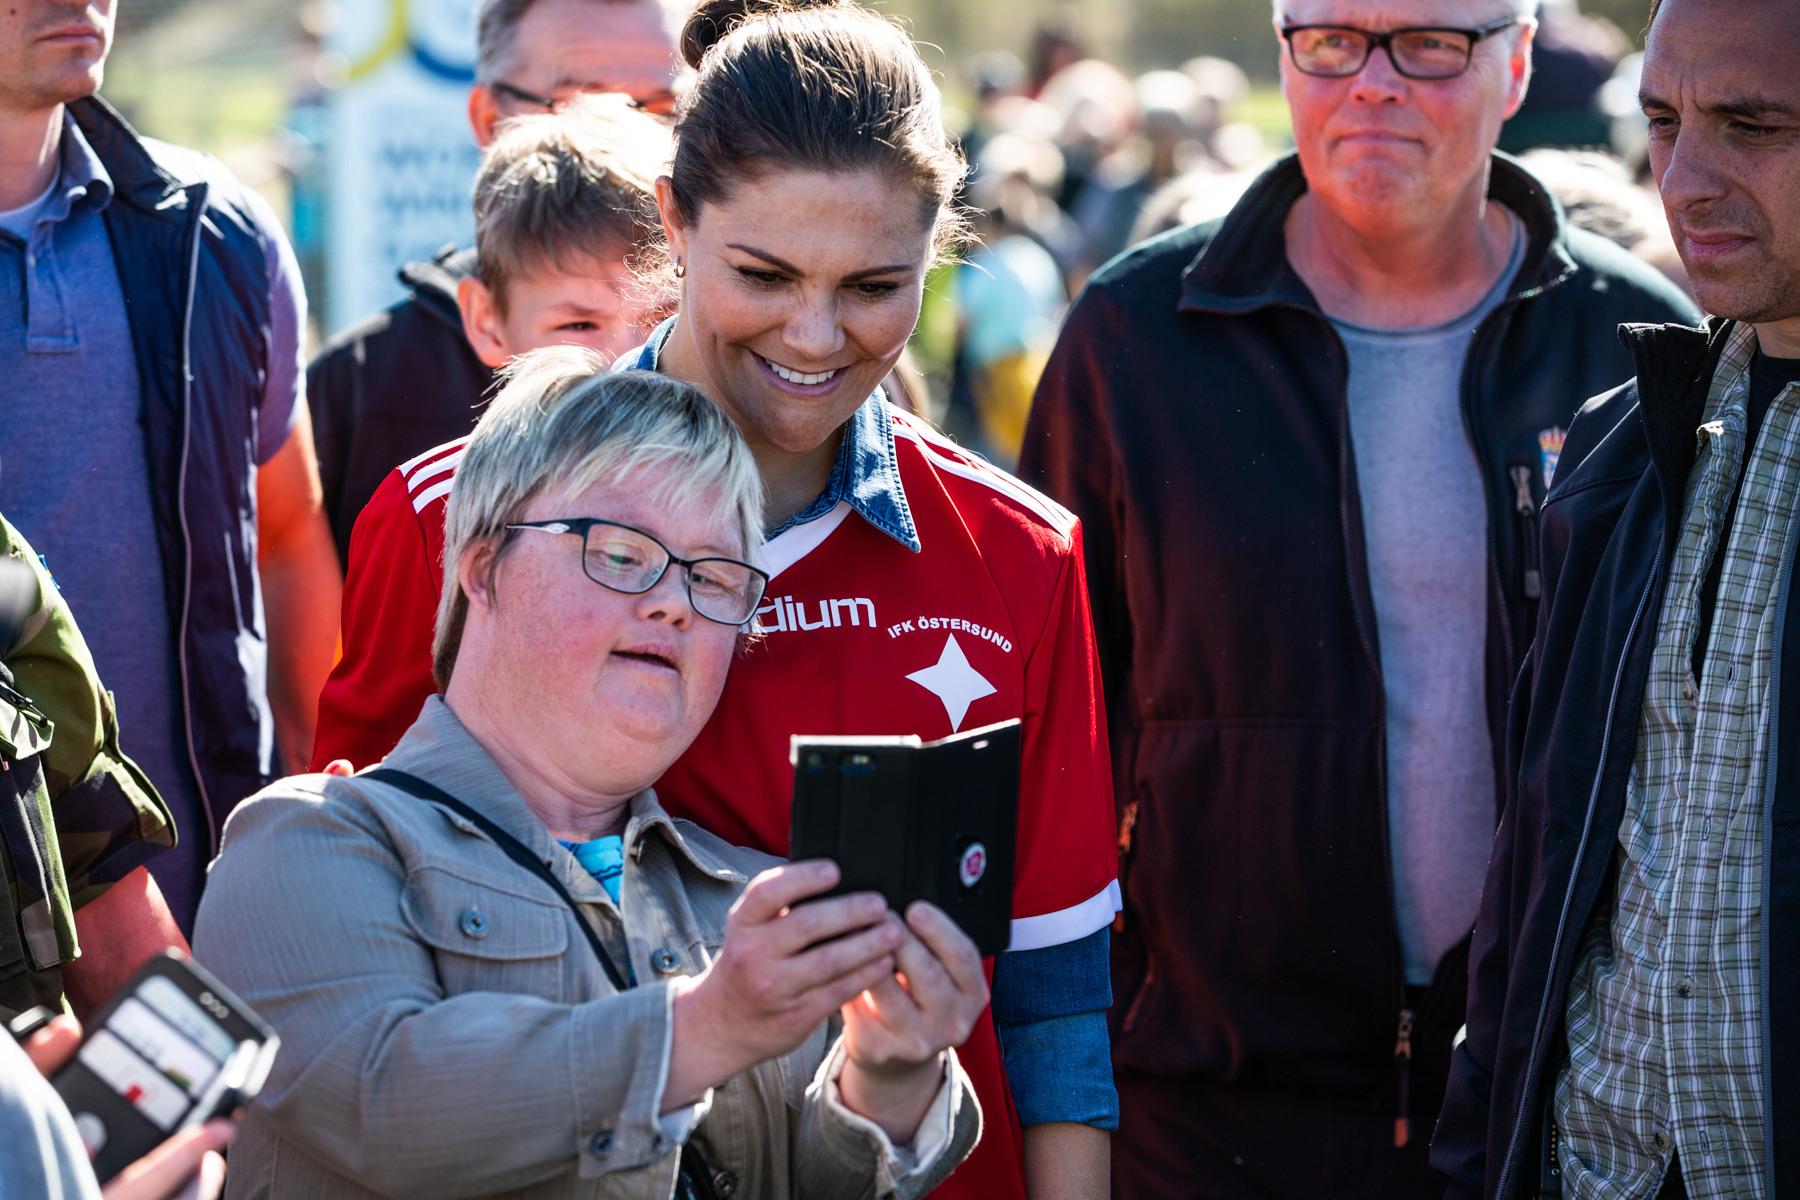 Crown Princess Victoria in a football T-shirt being shown something on a woman's mobile phone.